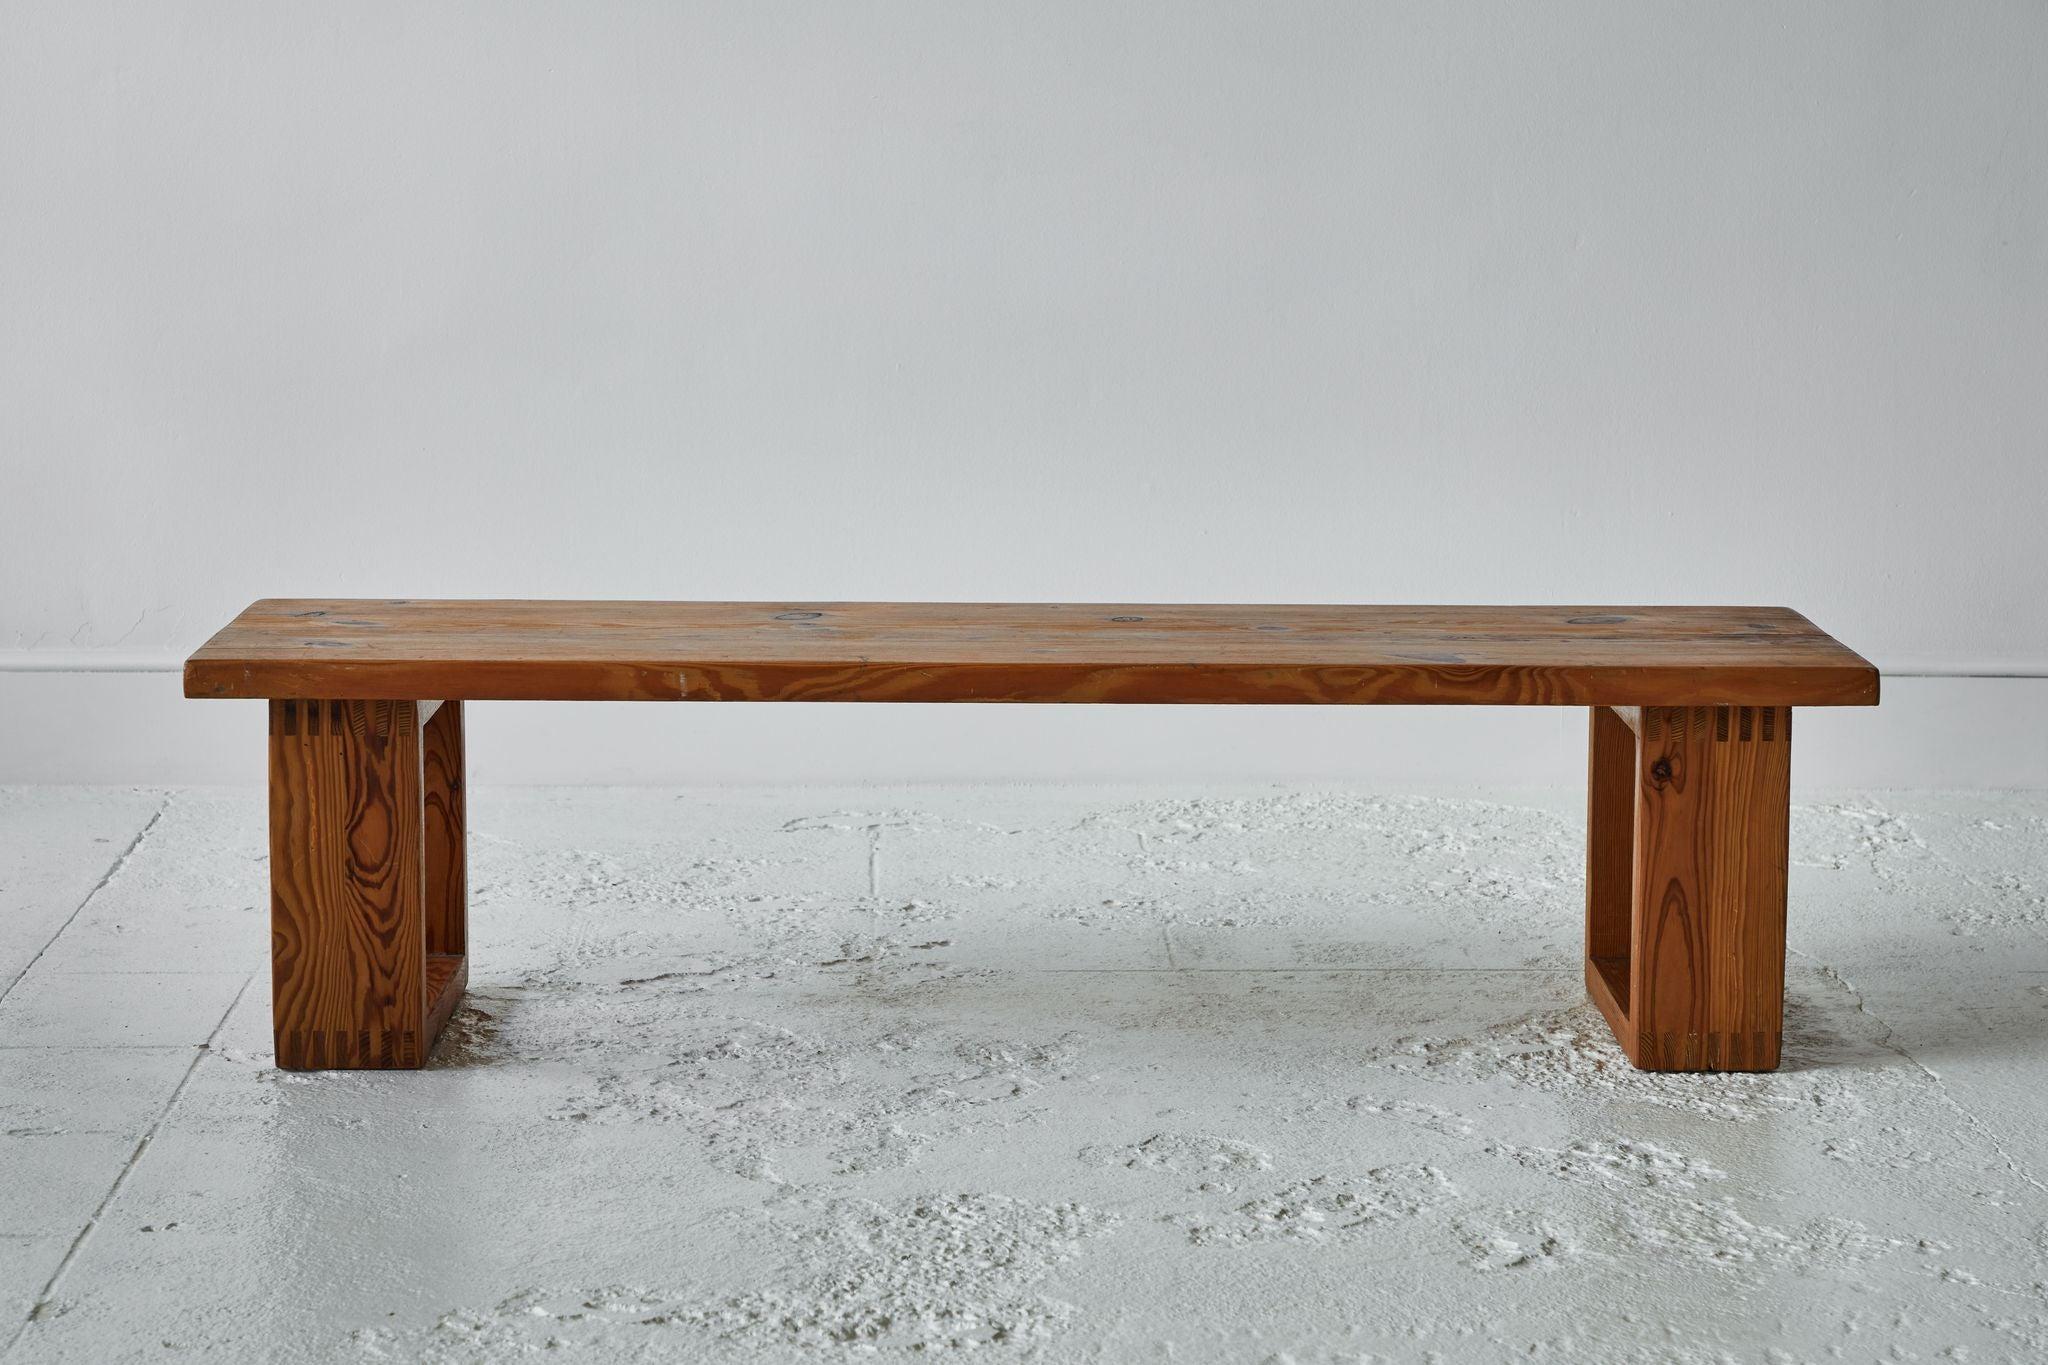 Beautiful European pine bench with squared leg support. The eye gravitates to the perfect proportions of this bench and natural pine. The detailed dovetail joints exhibit the craftsmanship. It will be a wonderful addition to any room.